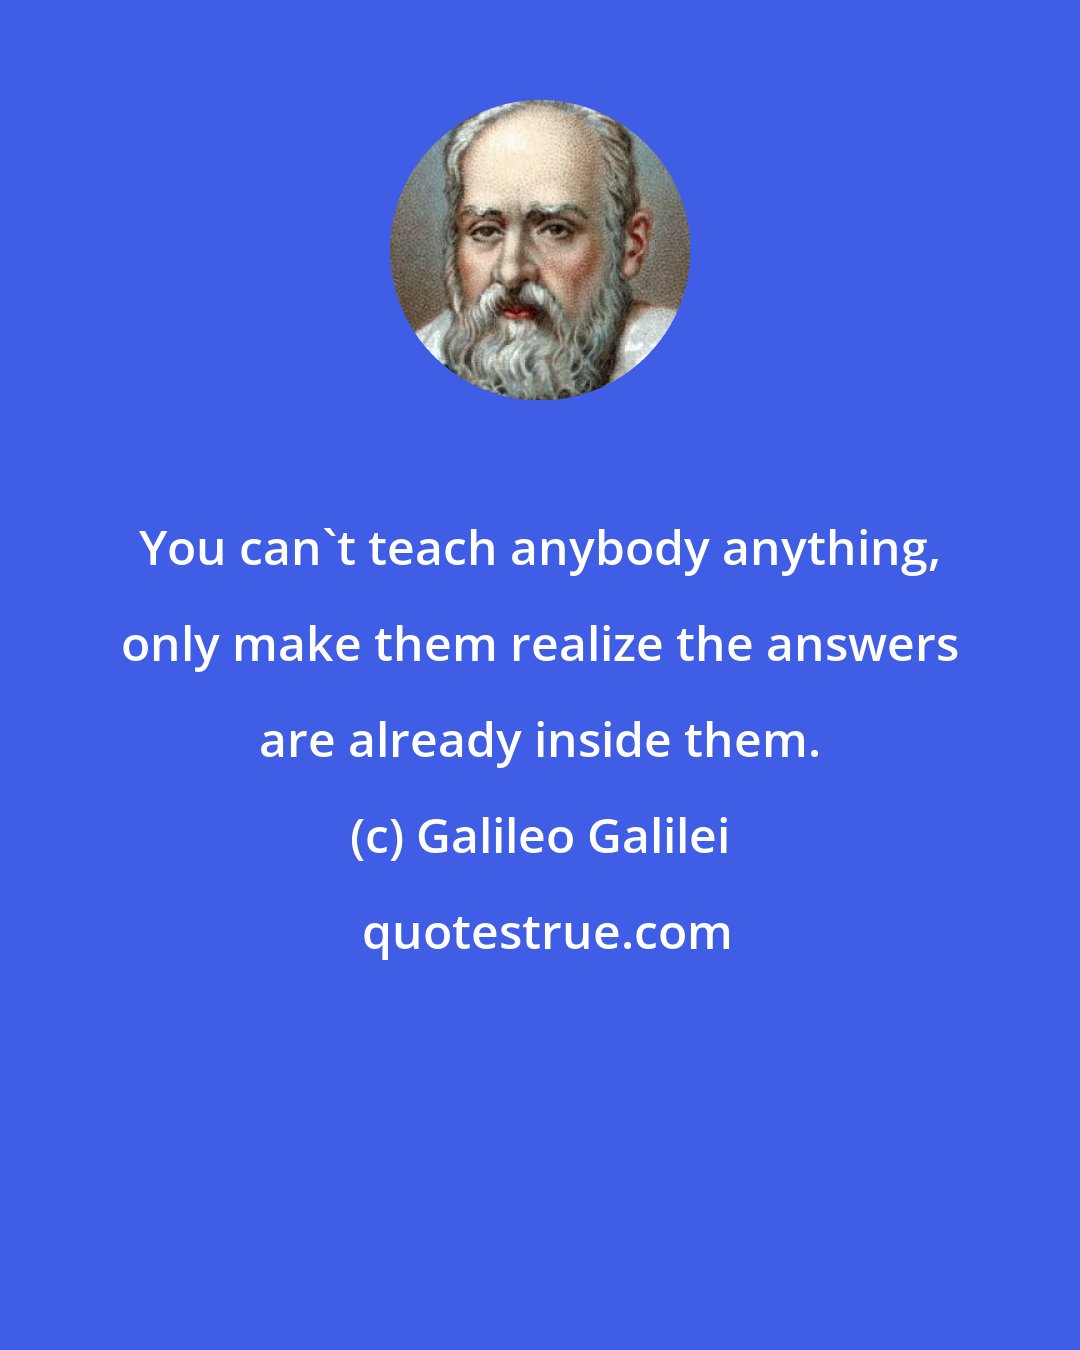 Galileo Galilei: You can't teach anybody anything, only make them realize the answers are already inside them.